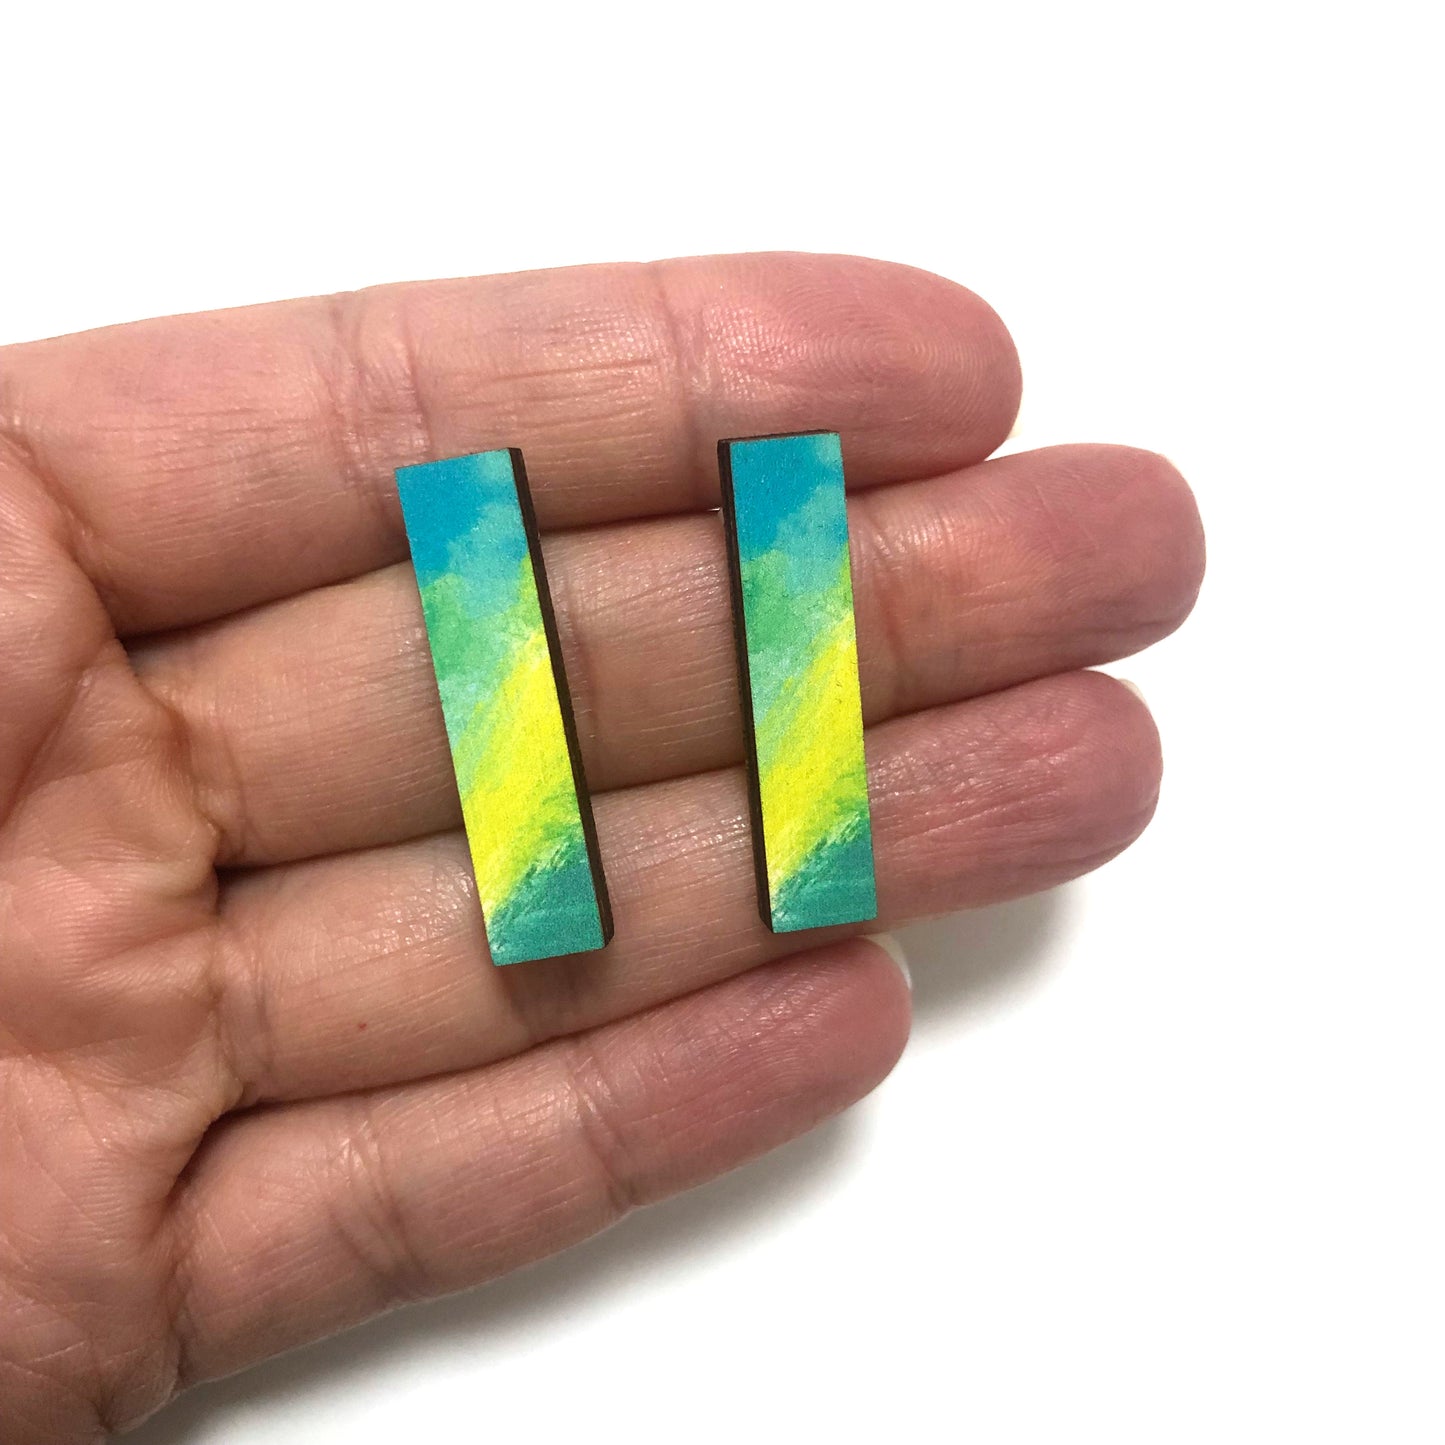 Green rectangle abstract design drop stud earrings